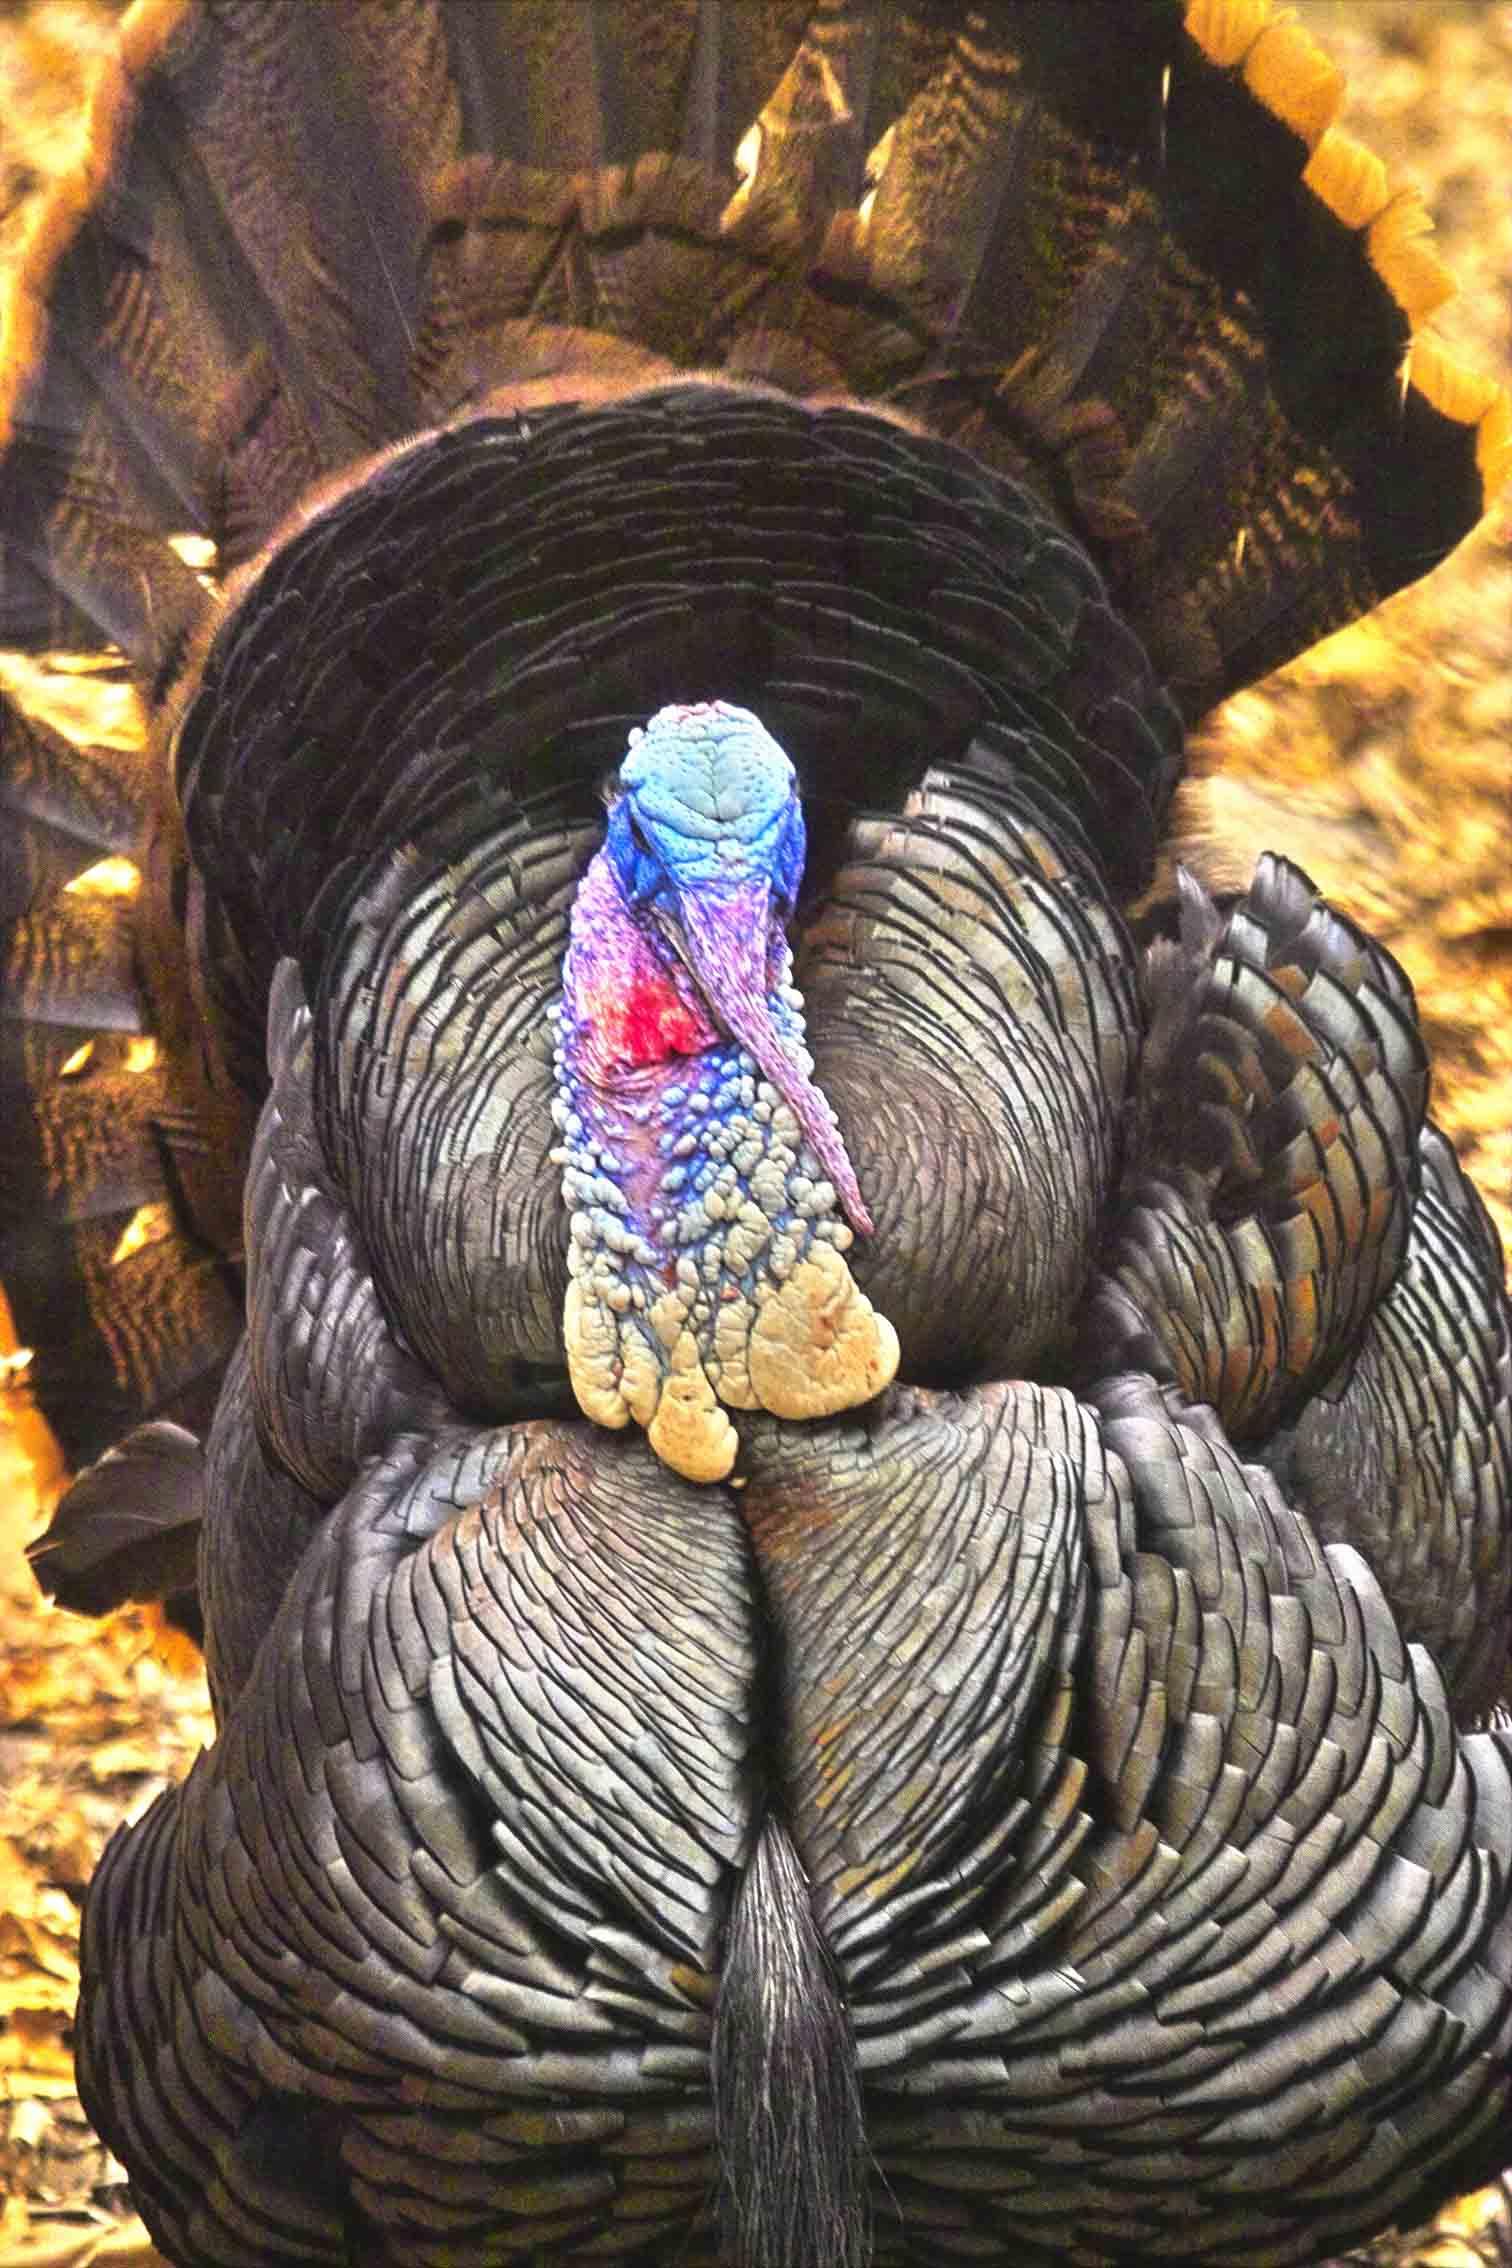 Turkey (user submitted)